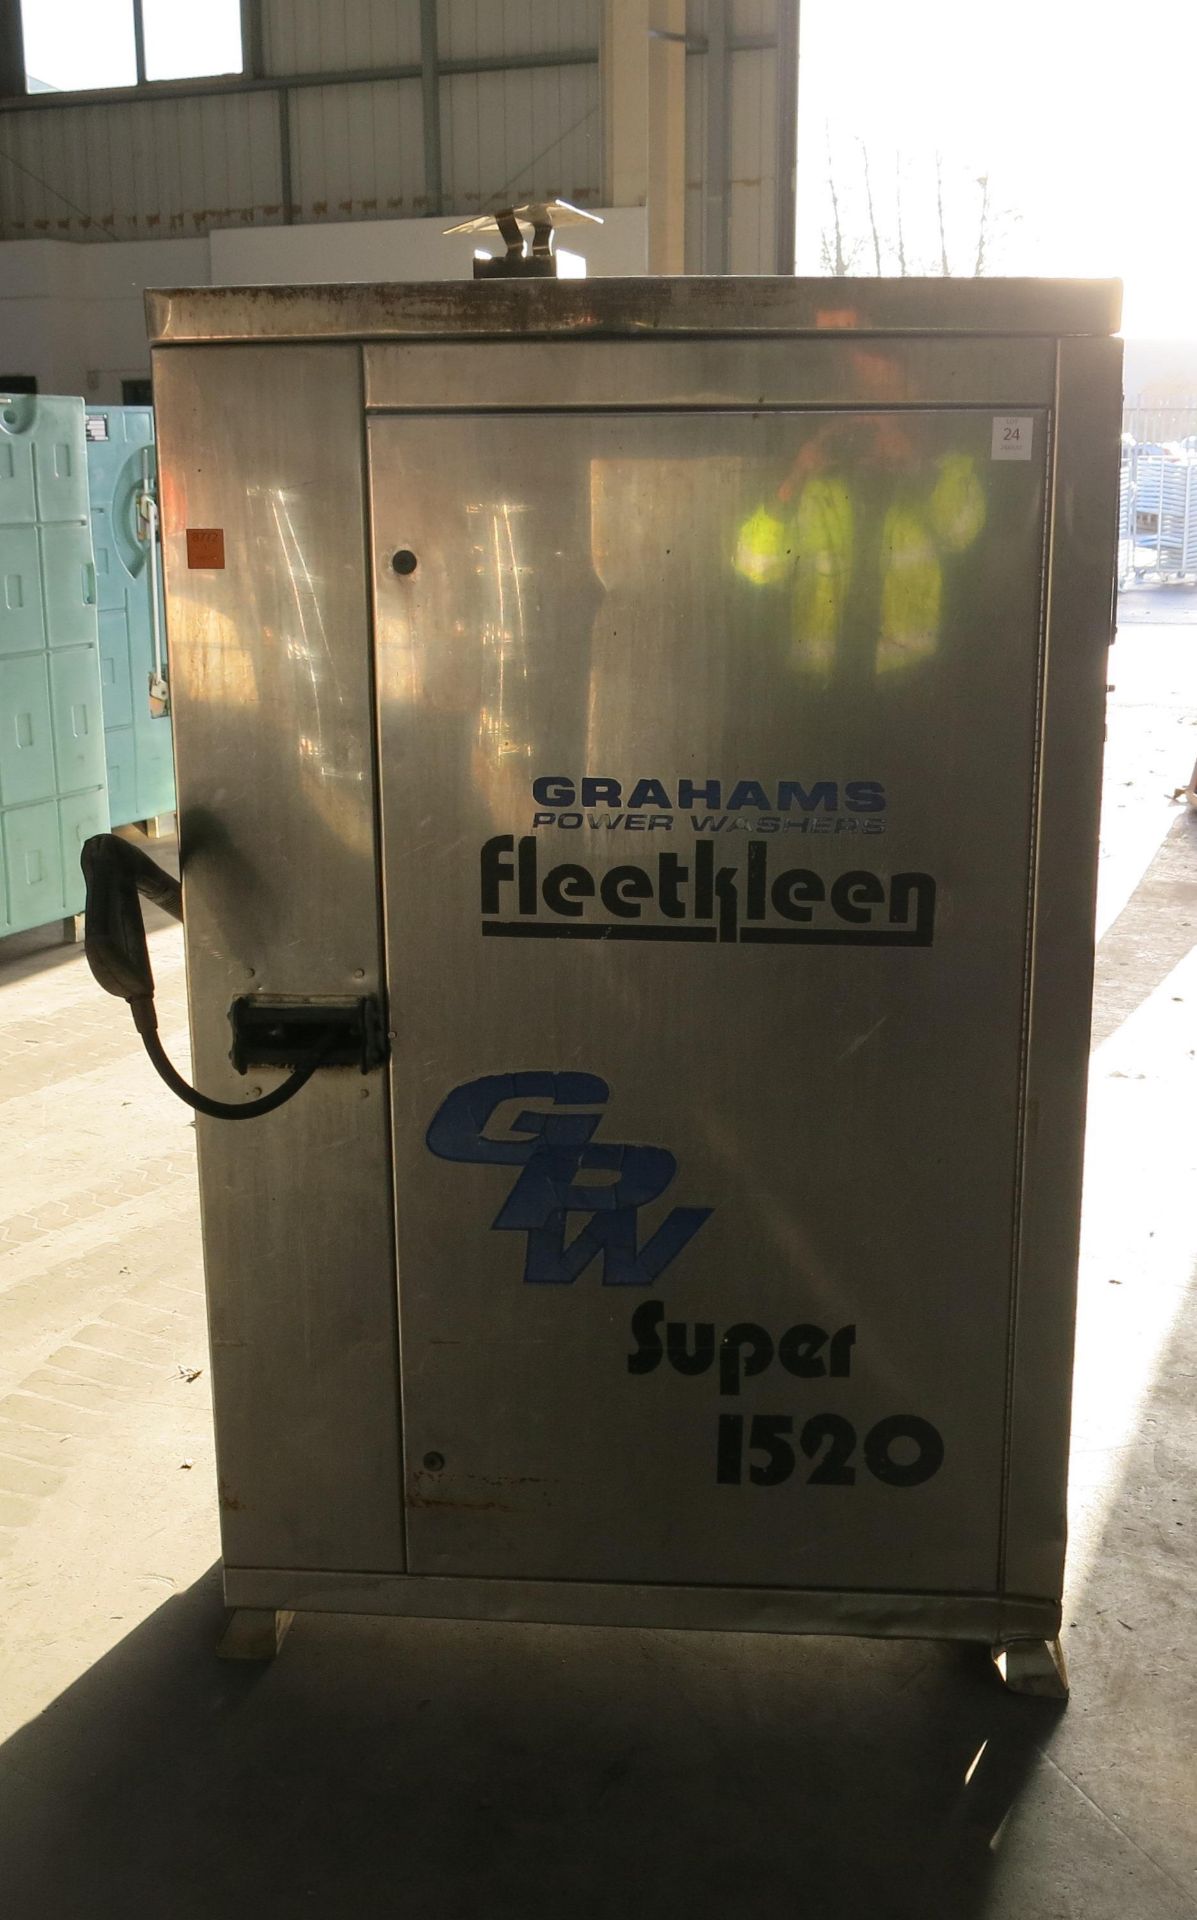 * A Grahams Super 1520 Steam Cleaner. Please note there is a £10 + VAT Lift Out Fee on this lot - Image 2 of 4